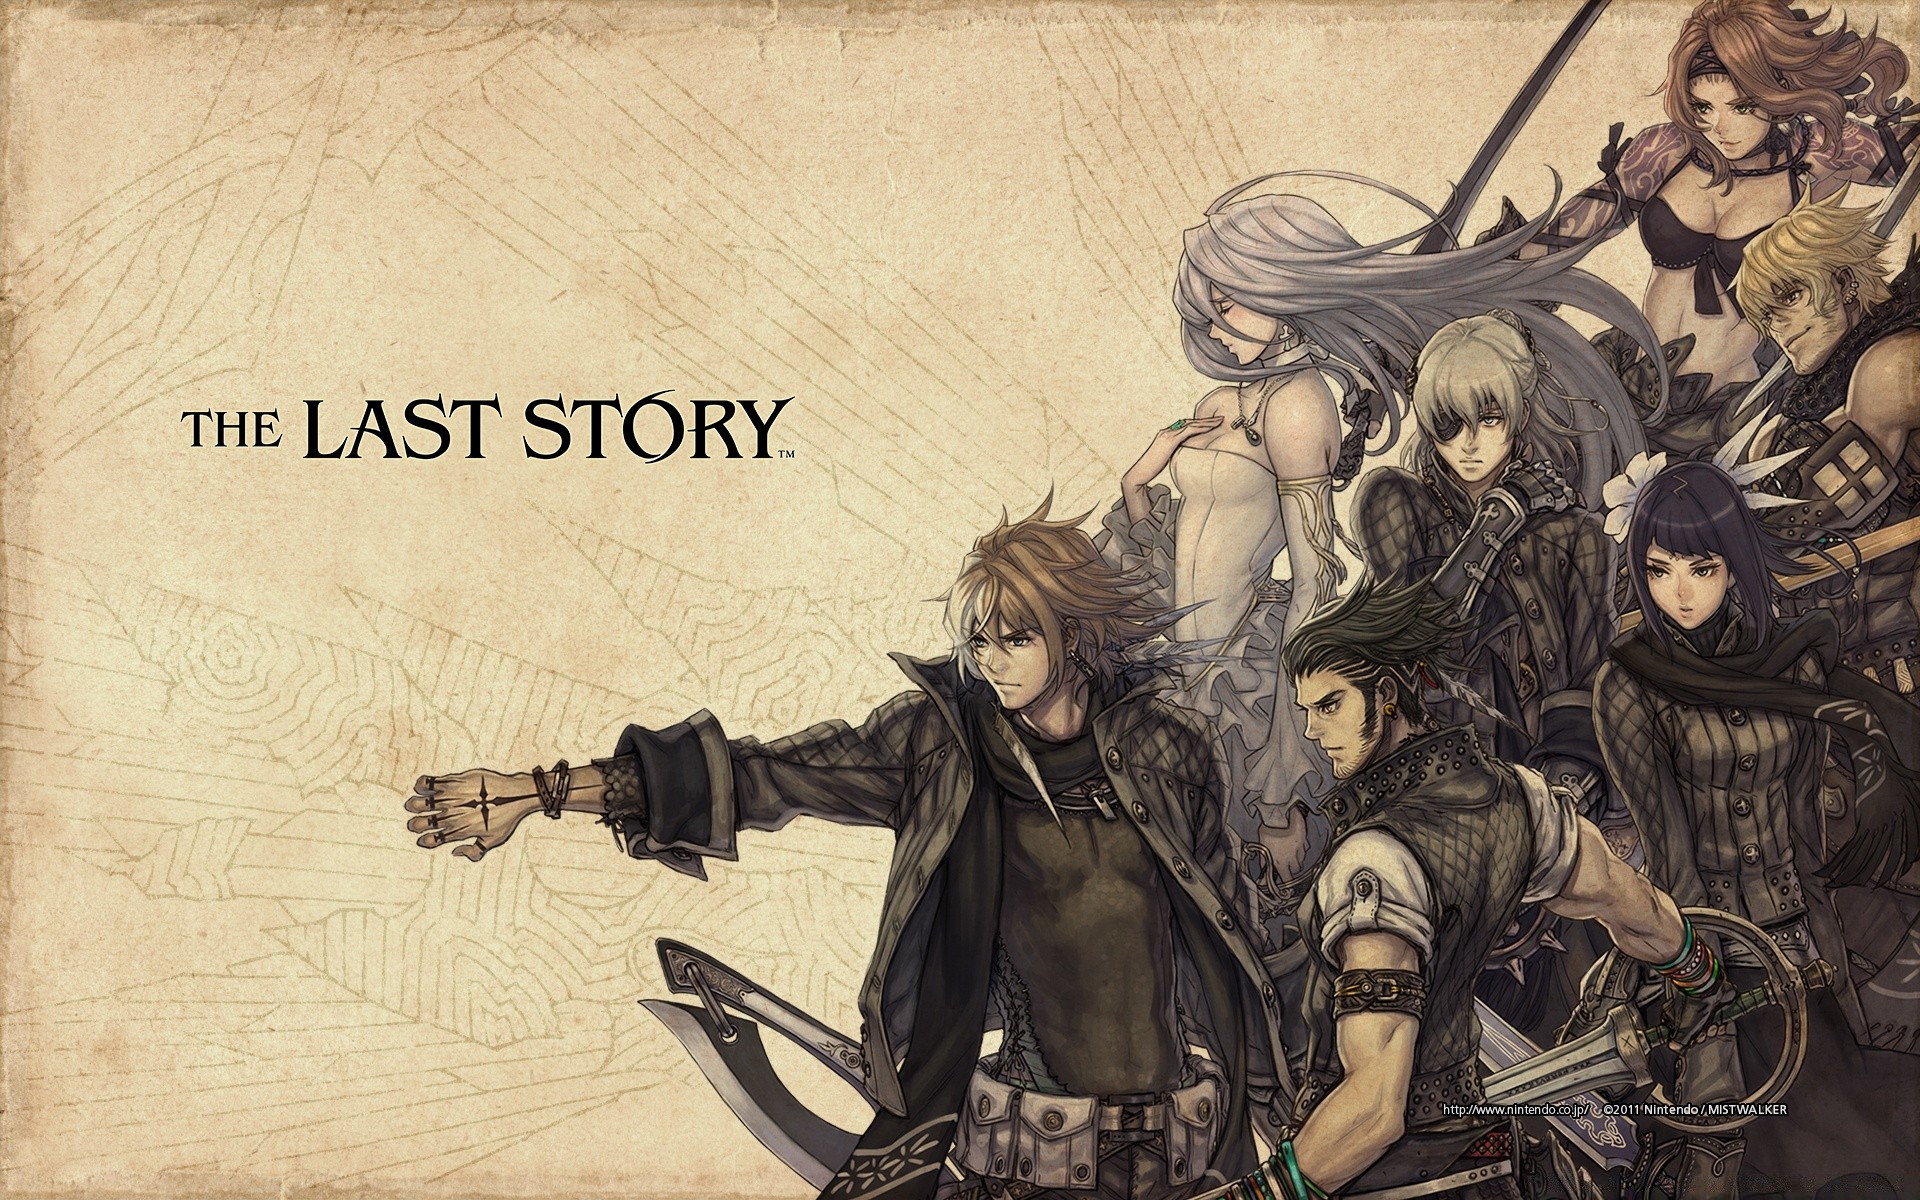 Pray game last story append uroom. The last story. Lost story. The last story 2011. The last story Wii.